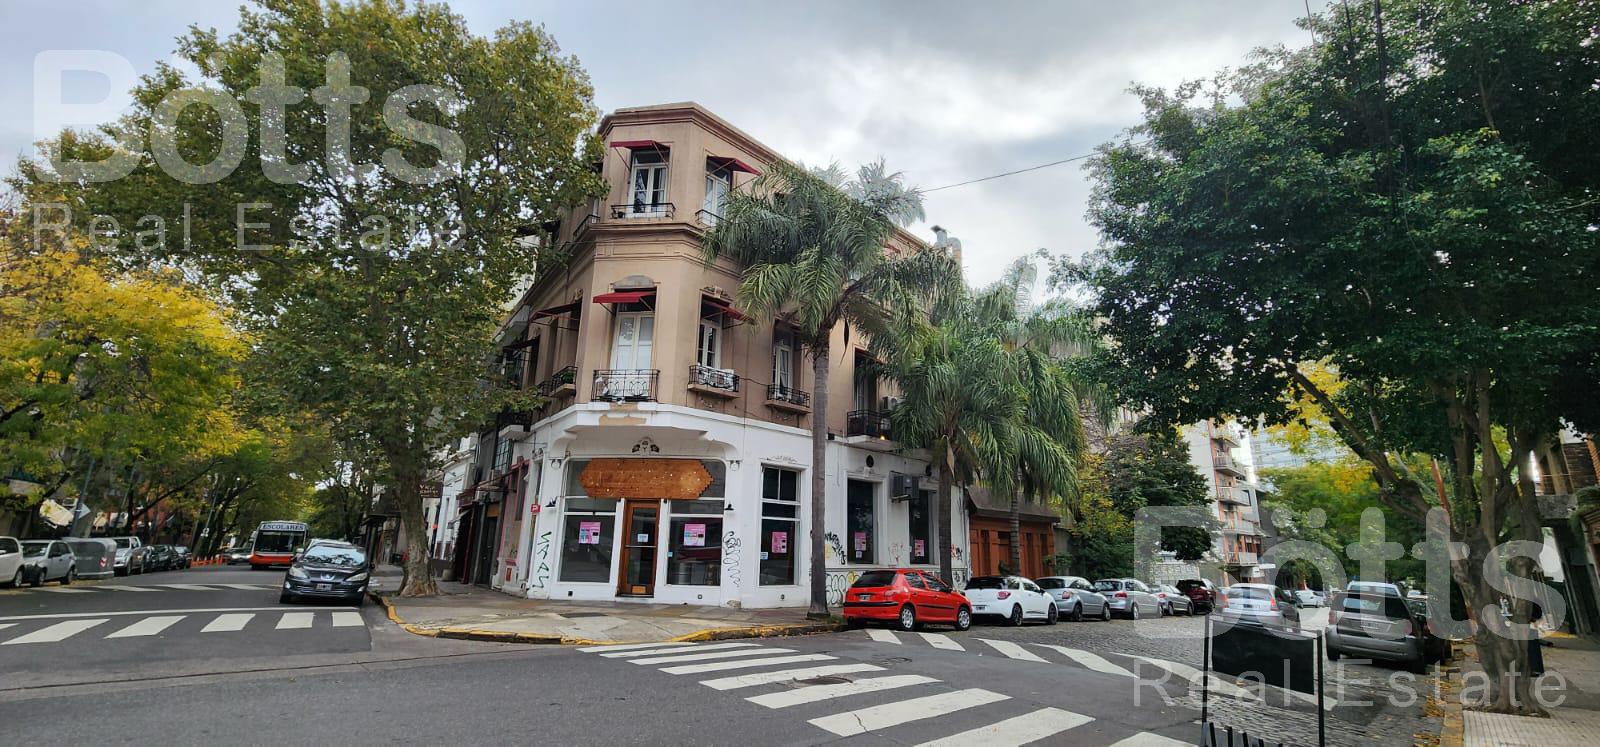 #5058405 | Alquiler | Local | Palermo Soho (Bötts Real Estate)